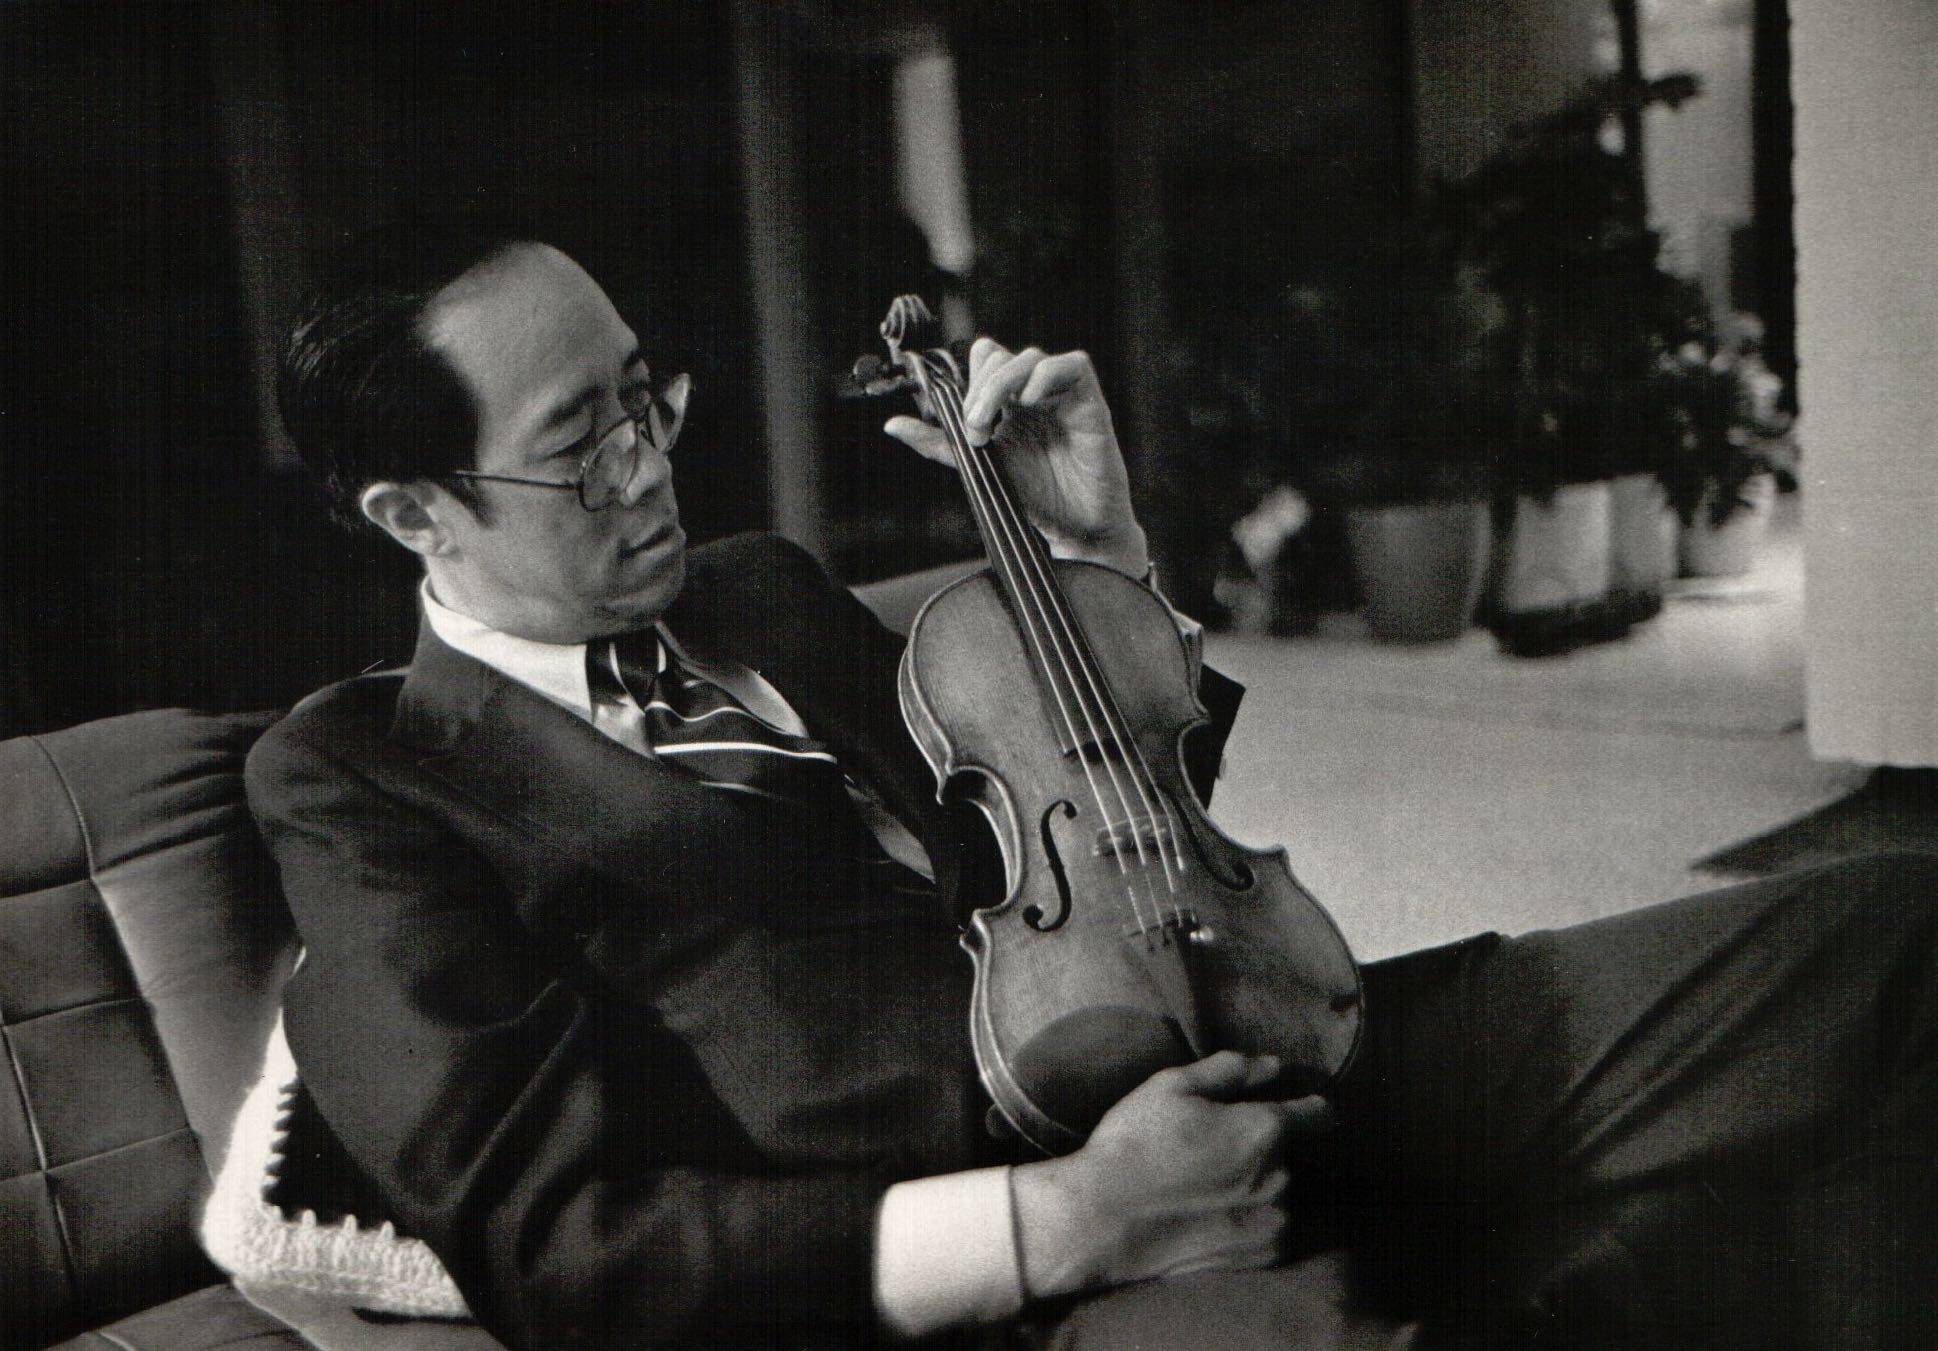 Lam Sau-wing with an instrument from his collection in the 1980s. Photo: courtesy of the Lam family